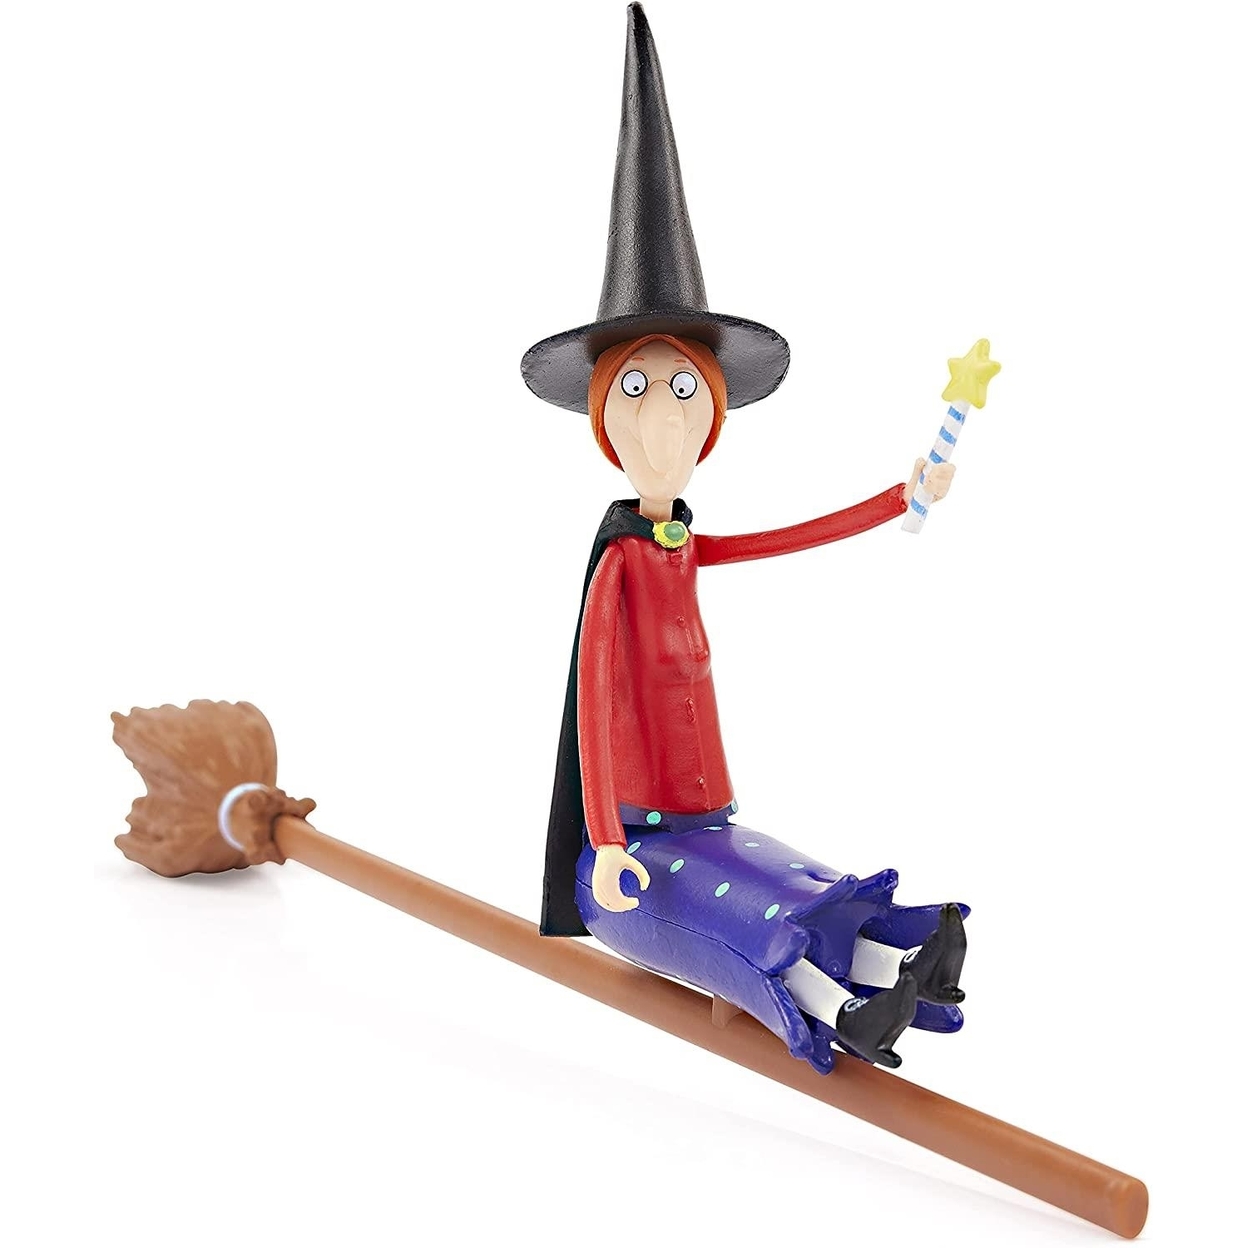 The Witch From Room On The Broom Witch Story By Julia Donaldson Figure WOW! Stuff